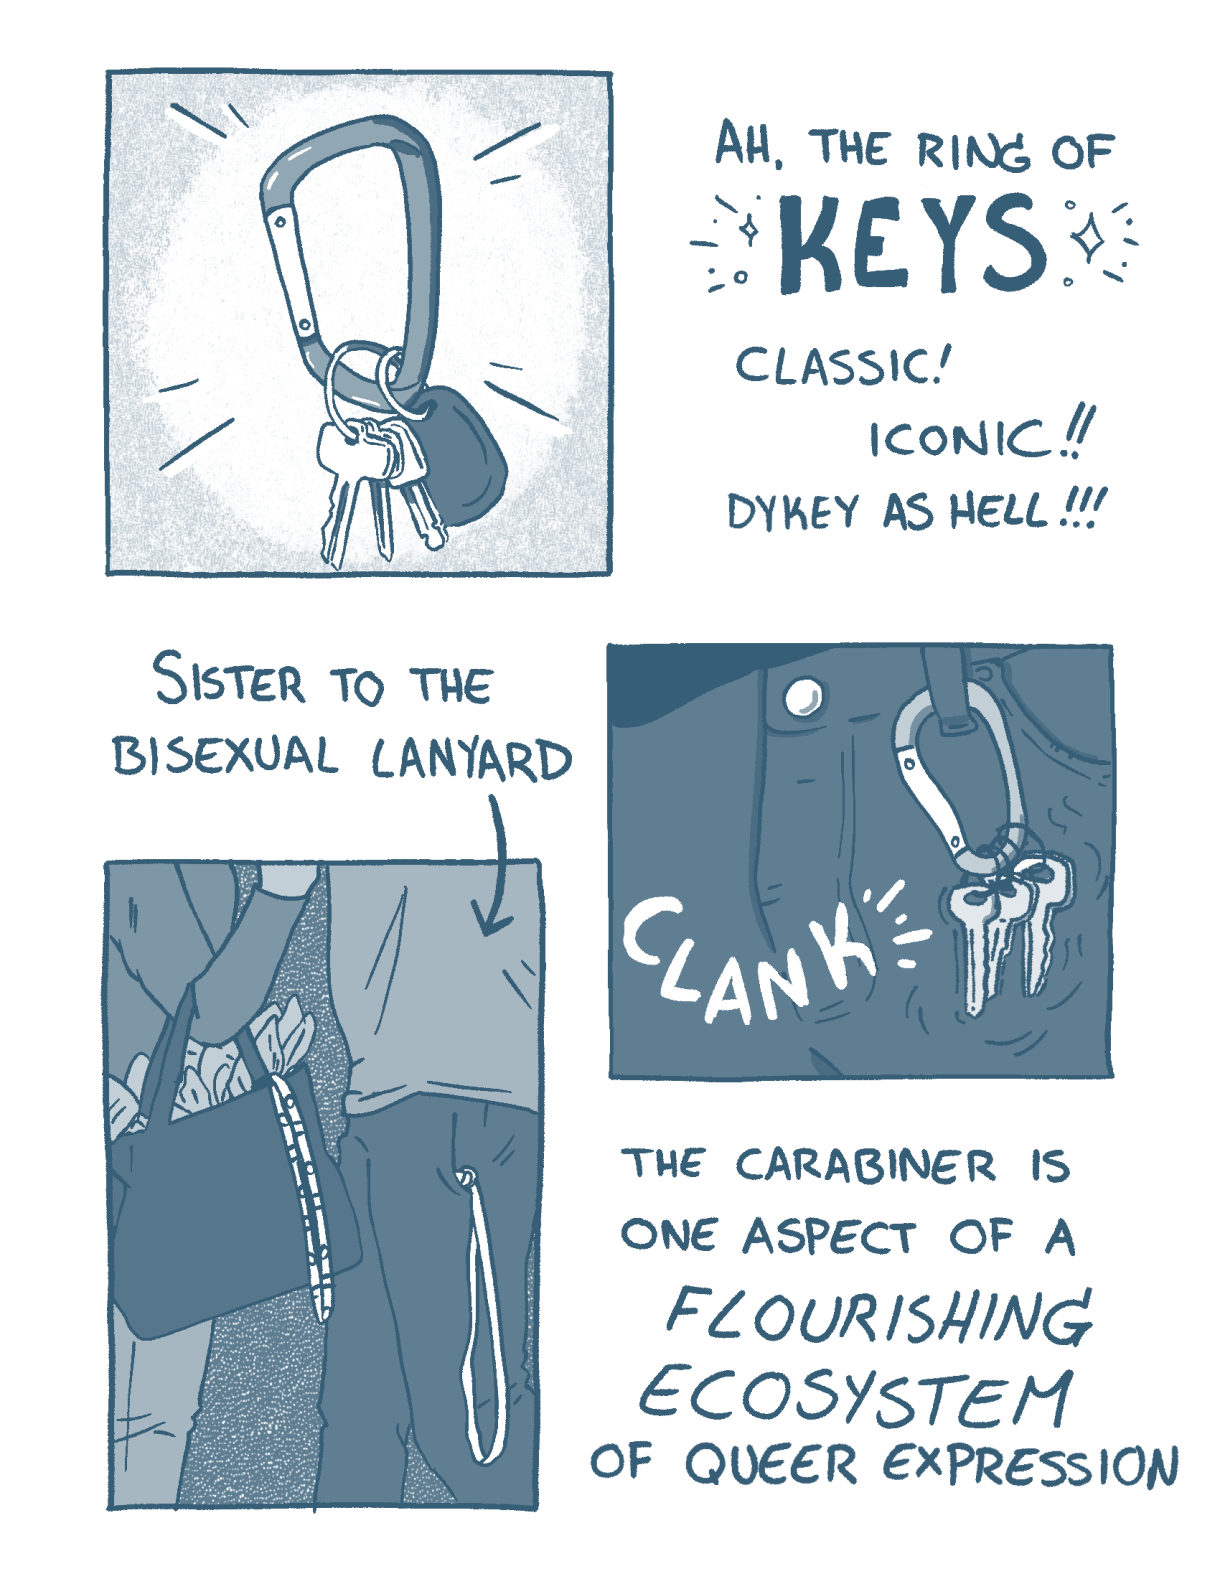 In a two panel comic, colored in shades of blue and white: A drawing of a Carabiner with keys on it, alongside the following text: AH, THE RING OF . I. *KEYS$: CLASSICI ICONIC!! DYKEY AS HELL !!! Nest to it is says "Sister to the Bisexual Lanyard, the Carabiner is one of a FLOURSHING ECOSYSTEM of Queer Expression"